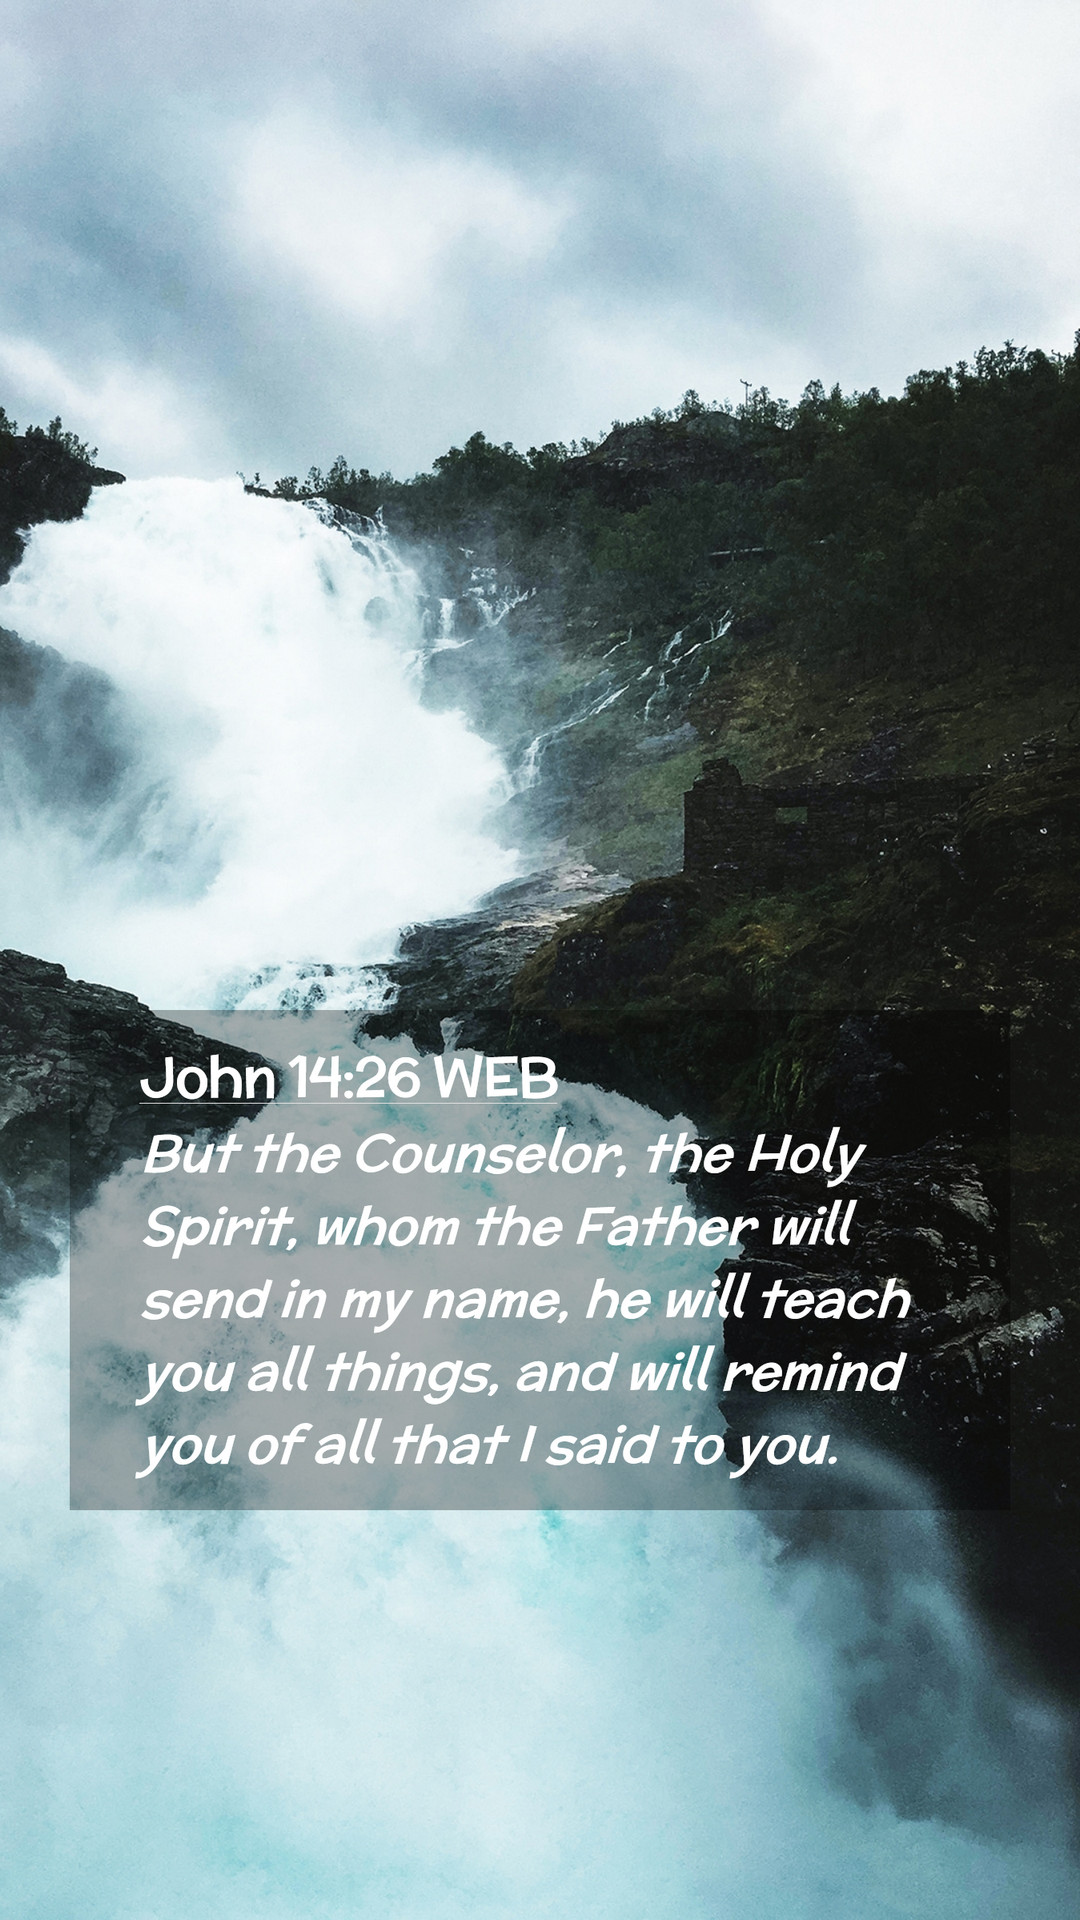 John 14:26 WEB Mobile Phone Wallpaper the Counselor, the Holy Spirit, whom the